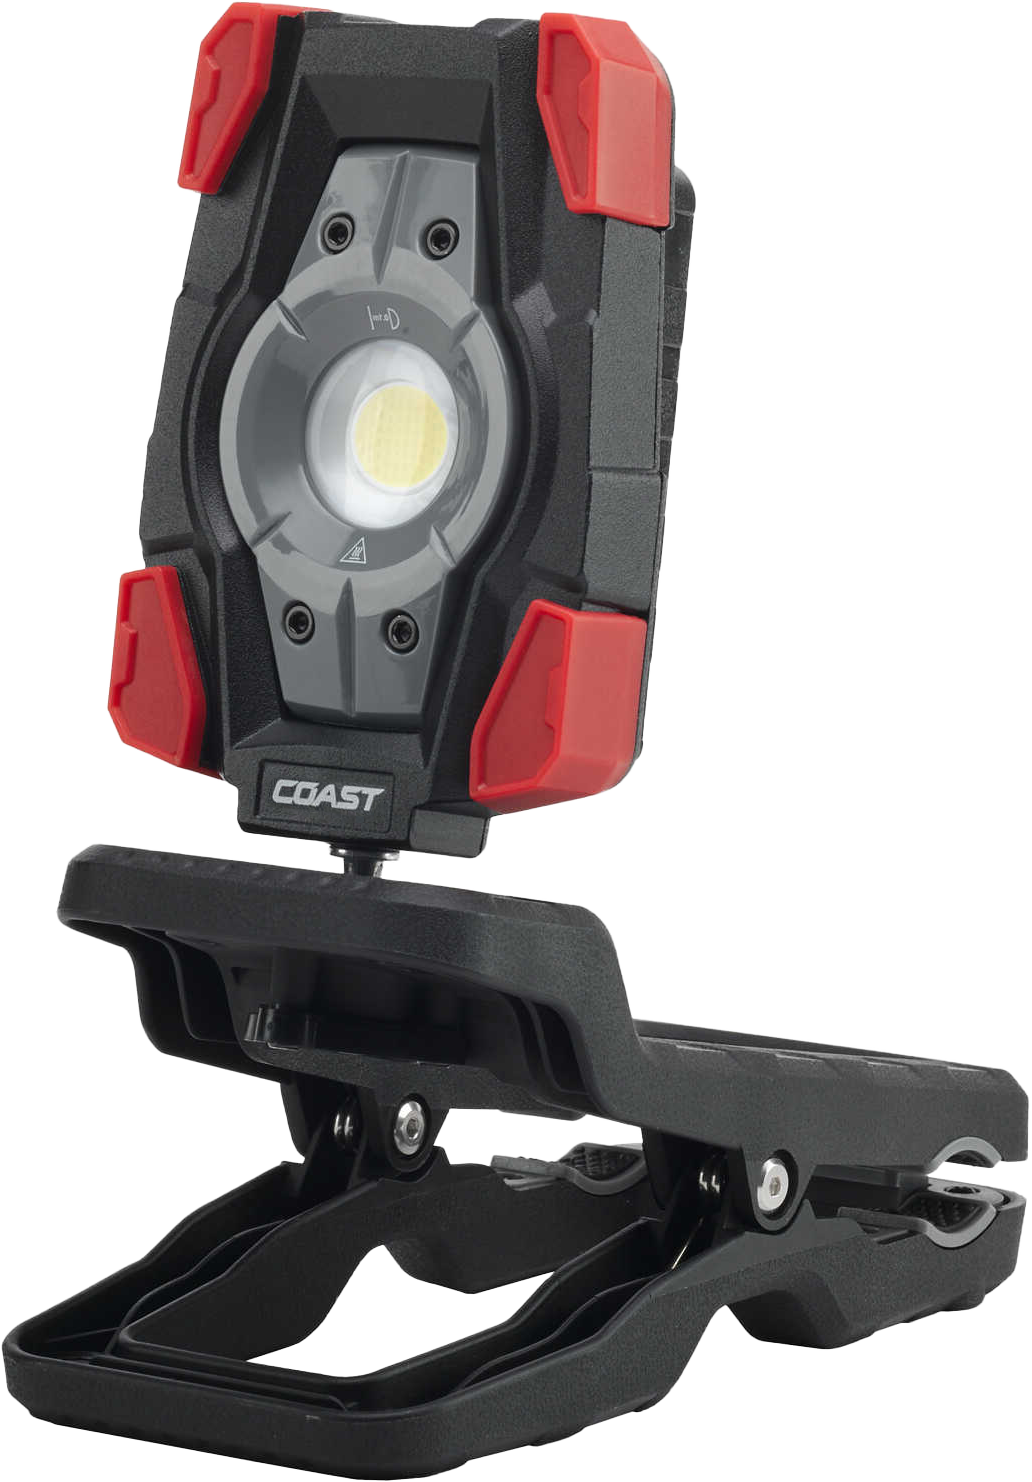 COAST 1750 Lumen Rechargeable Work Lamp with Power Bank